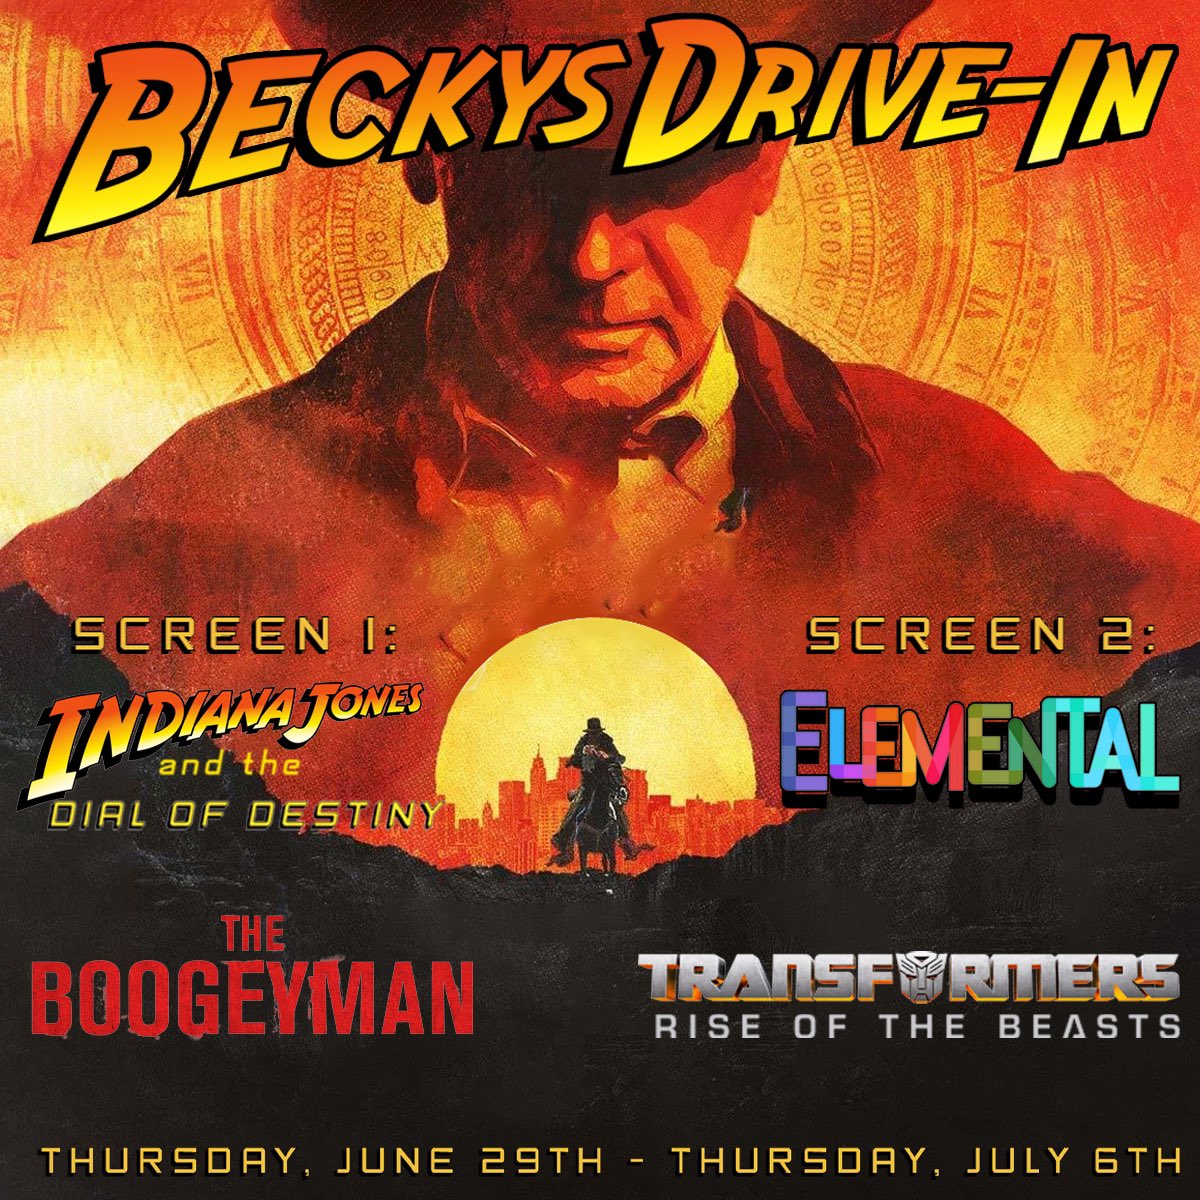 Showing Thursday, June 29th - Thursday, July 6th: Screen 1: 9:00 PM “Indiana Jones and the Dial of Destiny” PG-13 11:45 PM “The Boogeyman” PG-13 Screen 2: 9:00 PM “Elemental” PG 11:00 PM “Transformers: Rise of the Beasts” PG-13